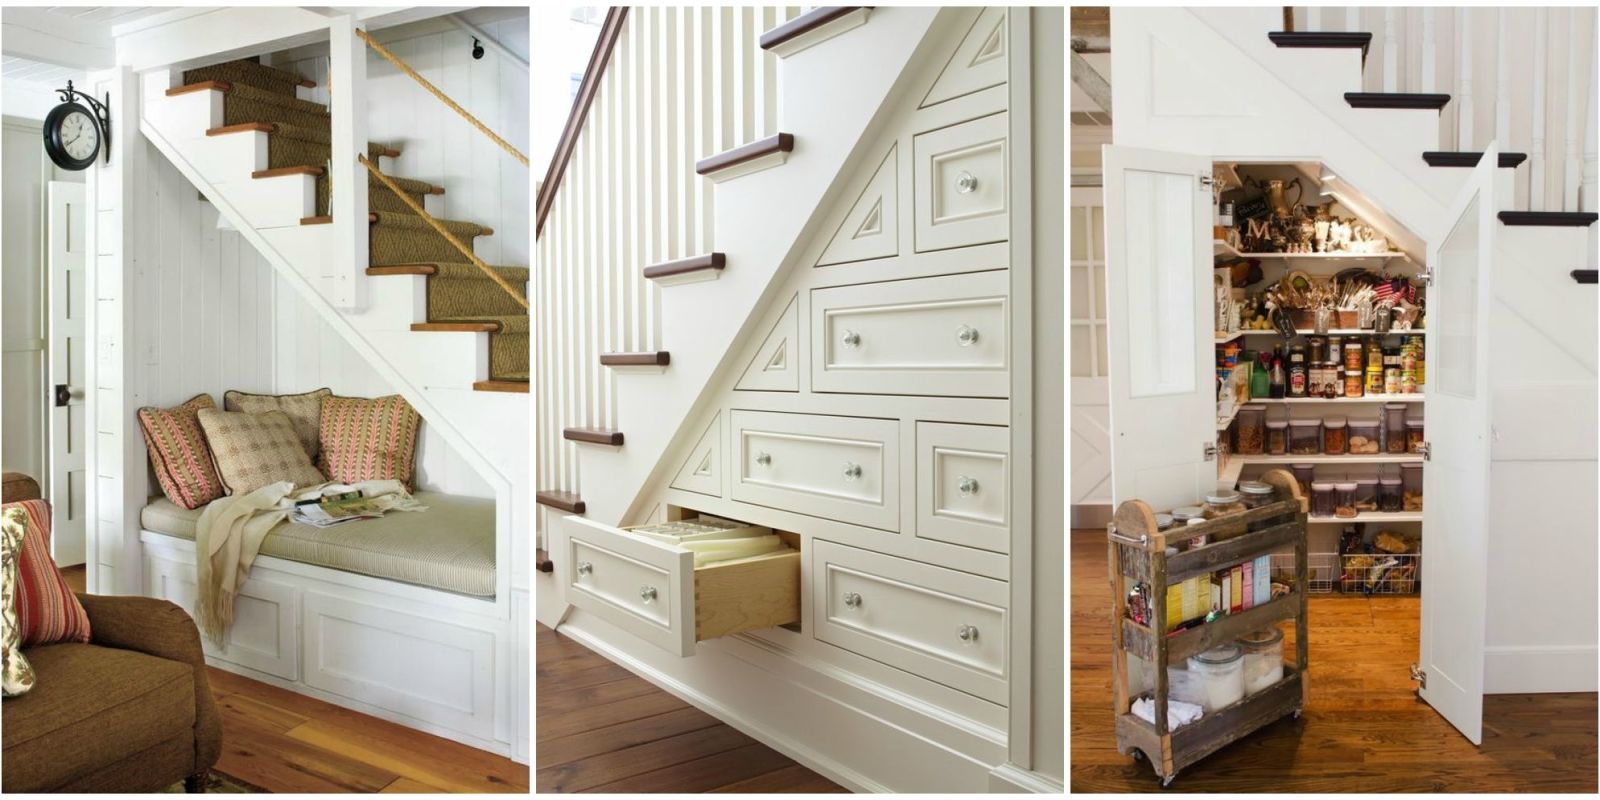 15 Genius under Stairs Storage Ideas - What to Do With Empty Space